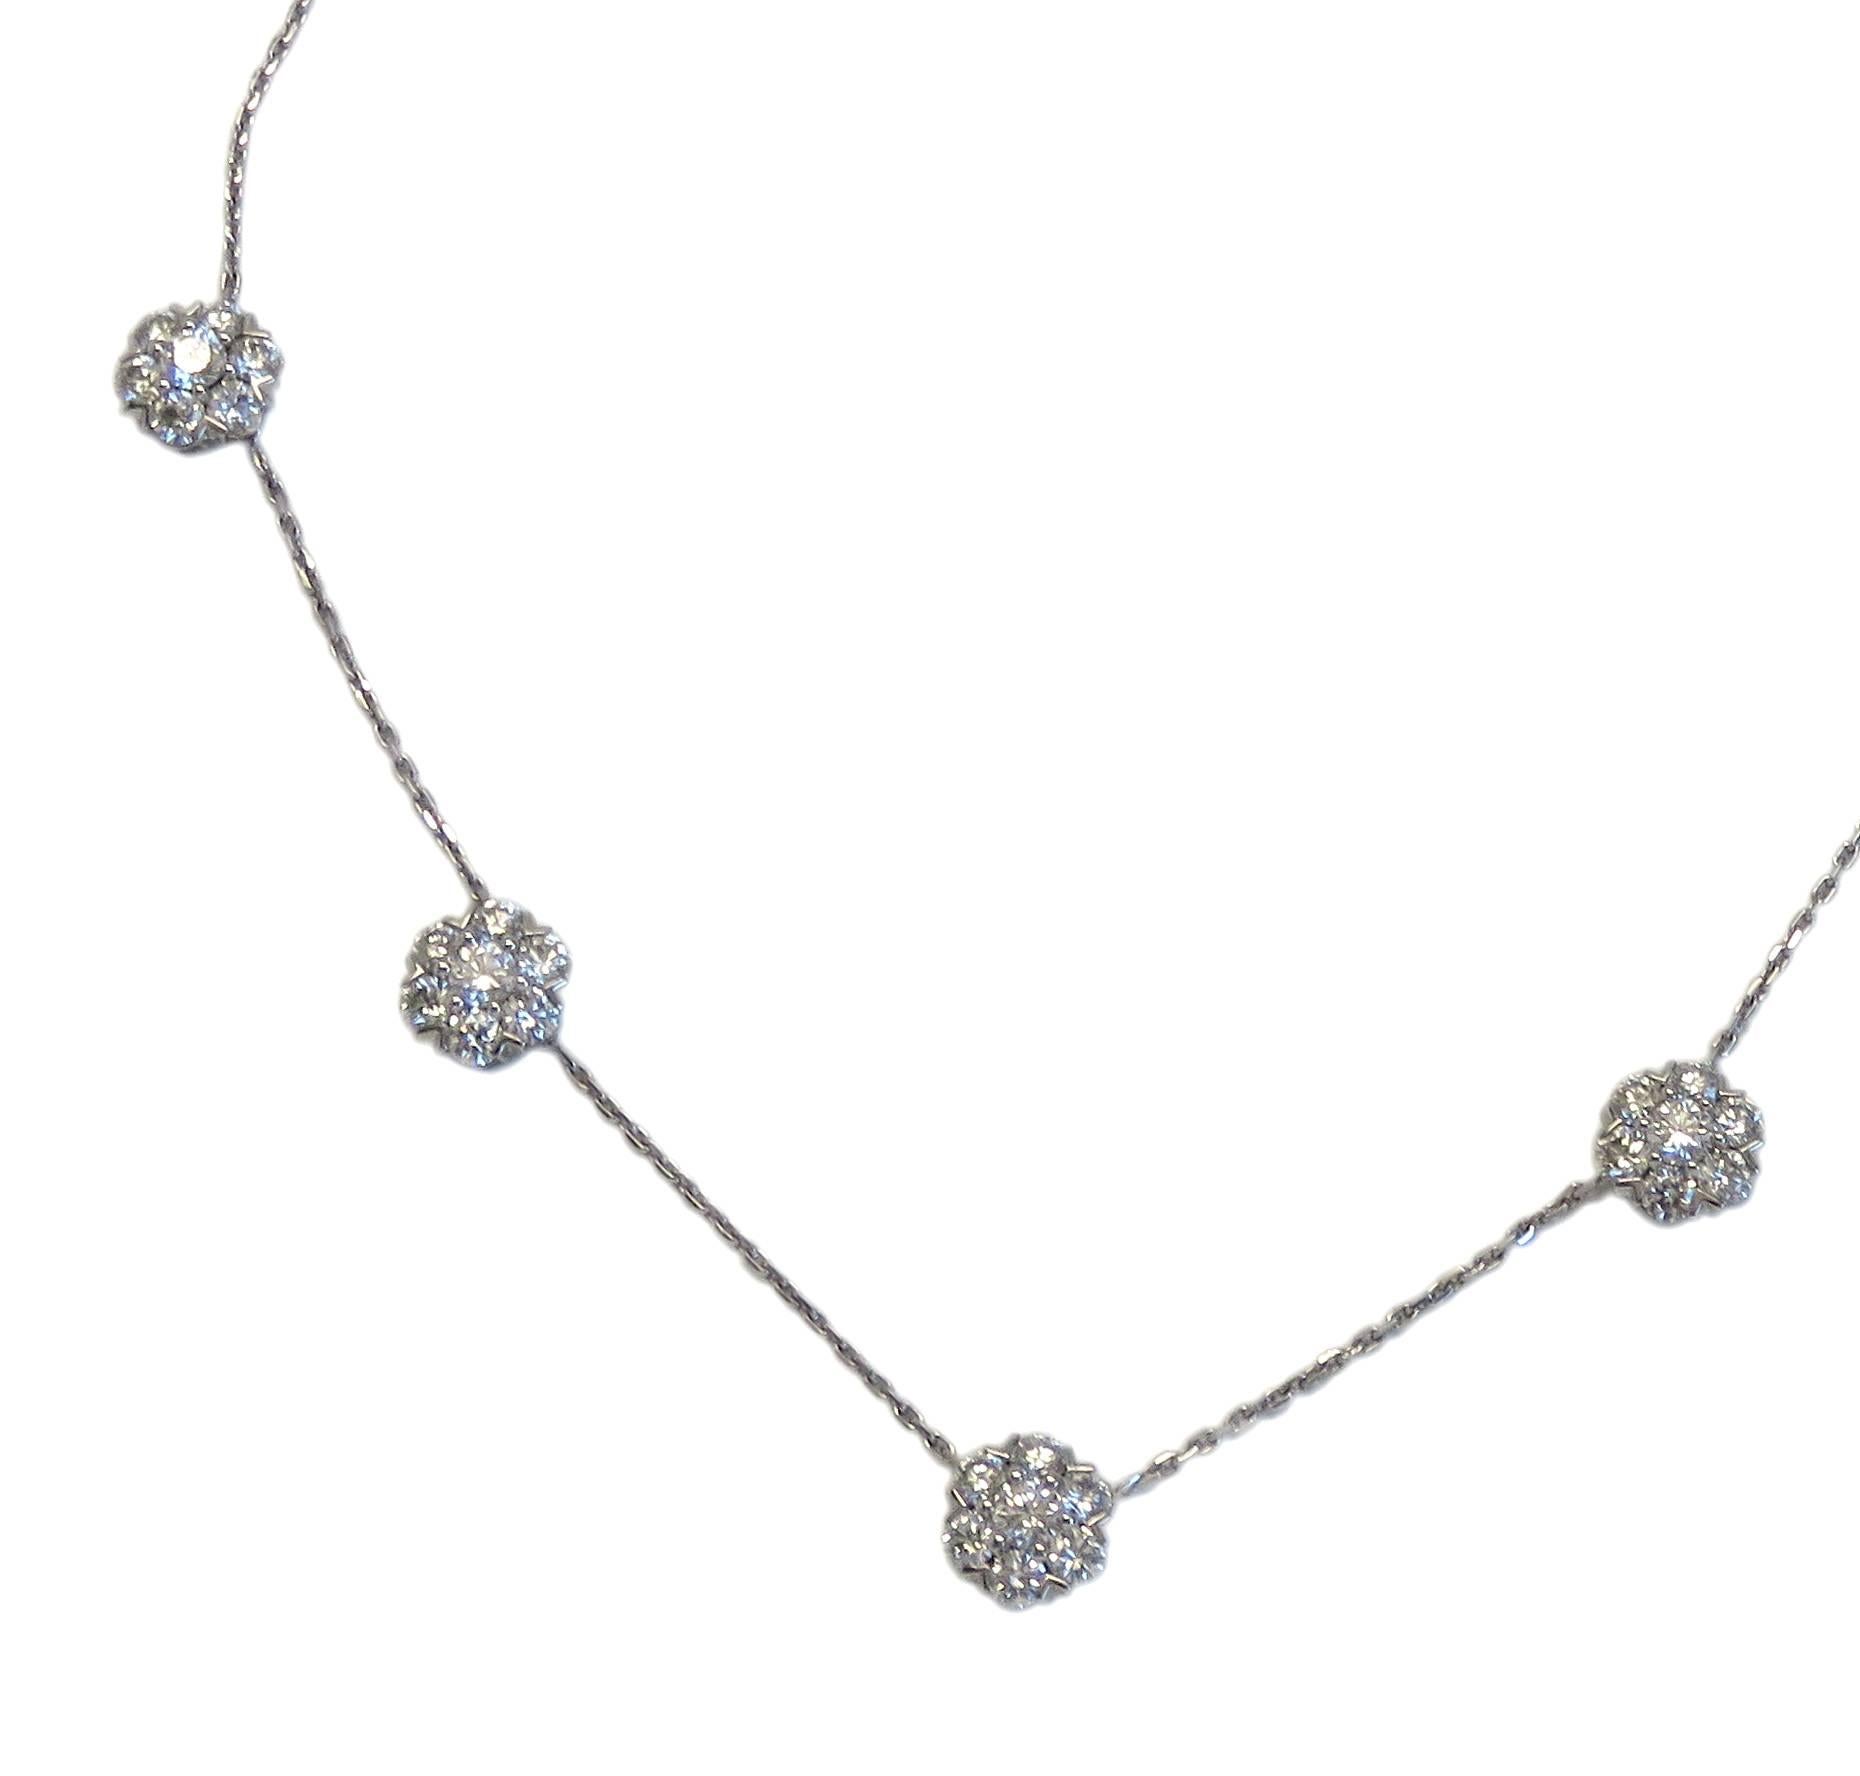 An 18k white gold necklace set with 4.7 carats of DEF/IF-VVS diamonds.  Crafted by Van Cleef & Arpels for the Fleurette collection, the necklace currently retails for $63,500. The necklace is 17